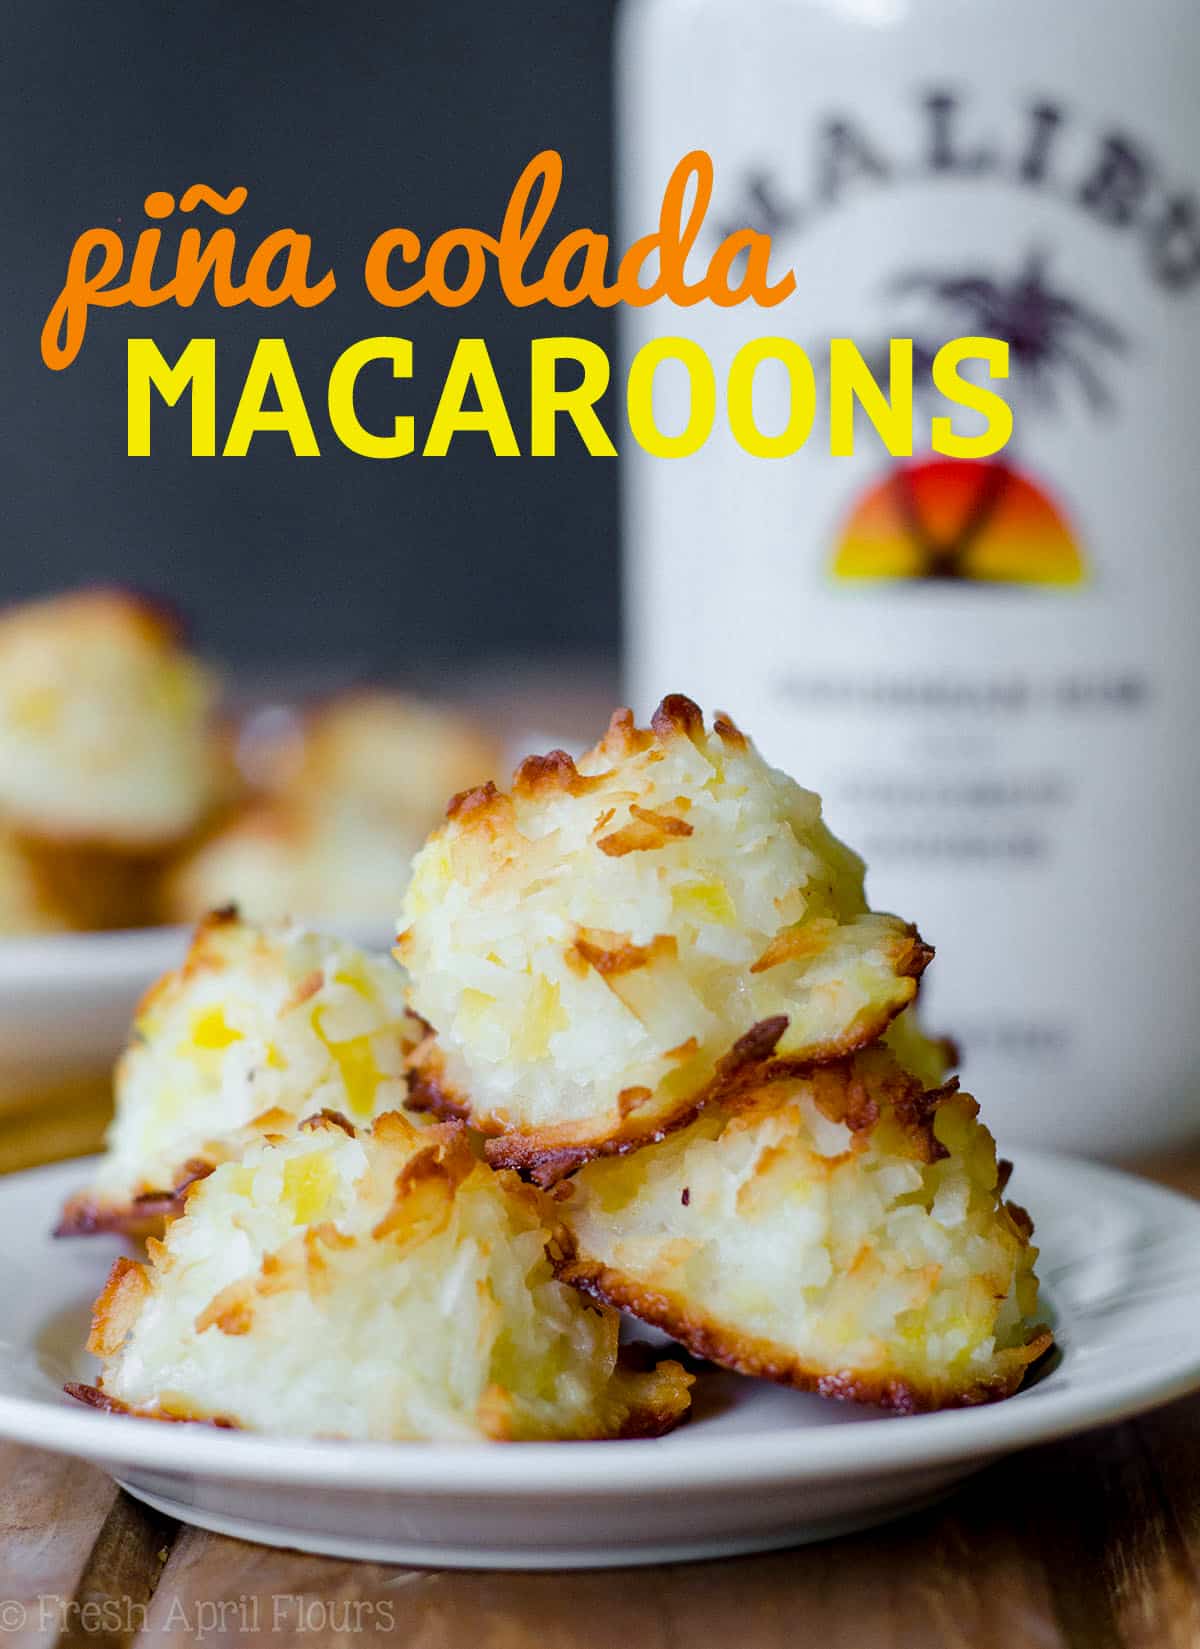 Piña Colada Macaroons: Easy coconut macaroons filled with crushed pineapple and spiked with a touch of coconut rum. via @frshaprilflours